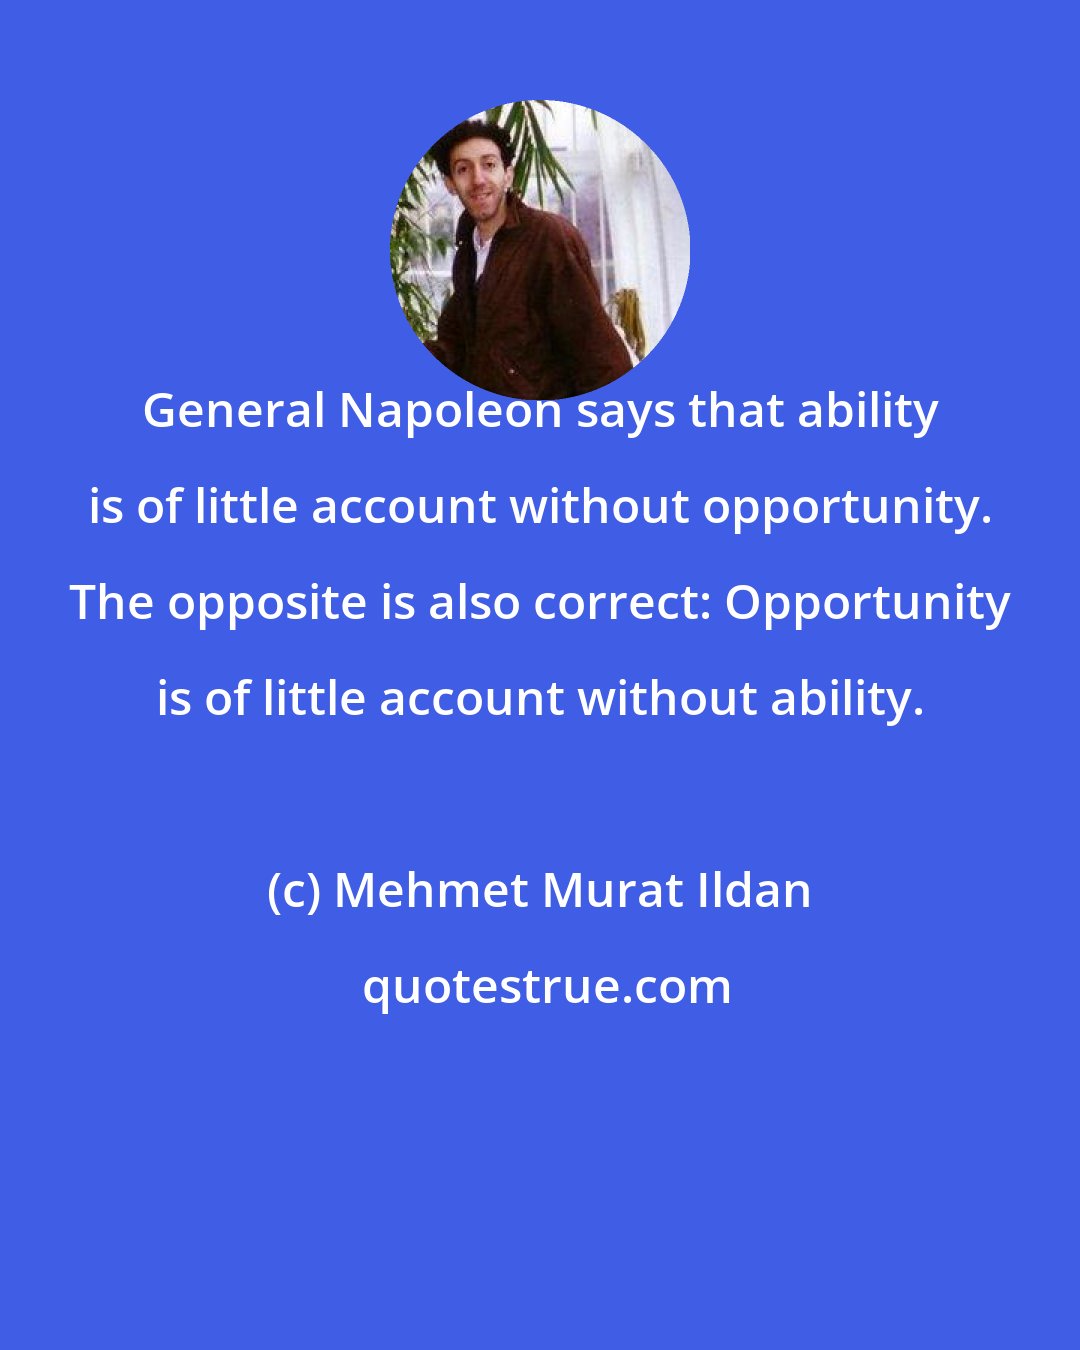 Mehmet Murat Ildan: General Napoleon says that ability is of little account without opportunity. The opposite is also correct: Opportunity is of little account without ability.